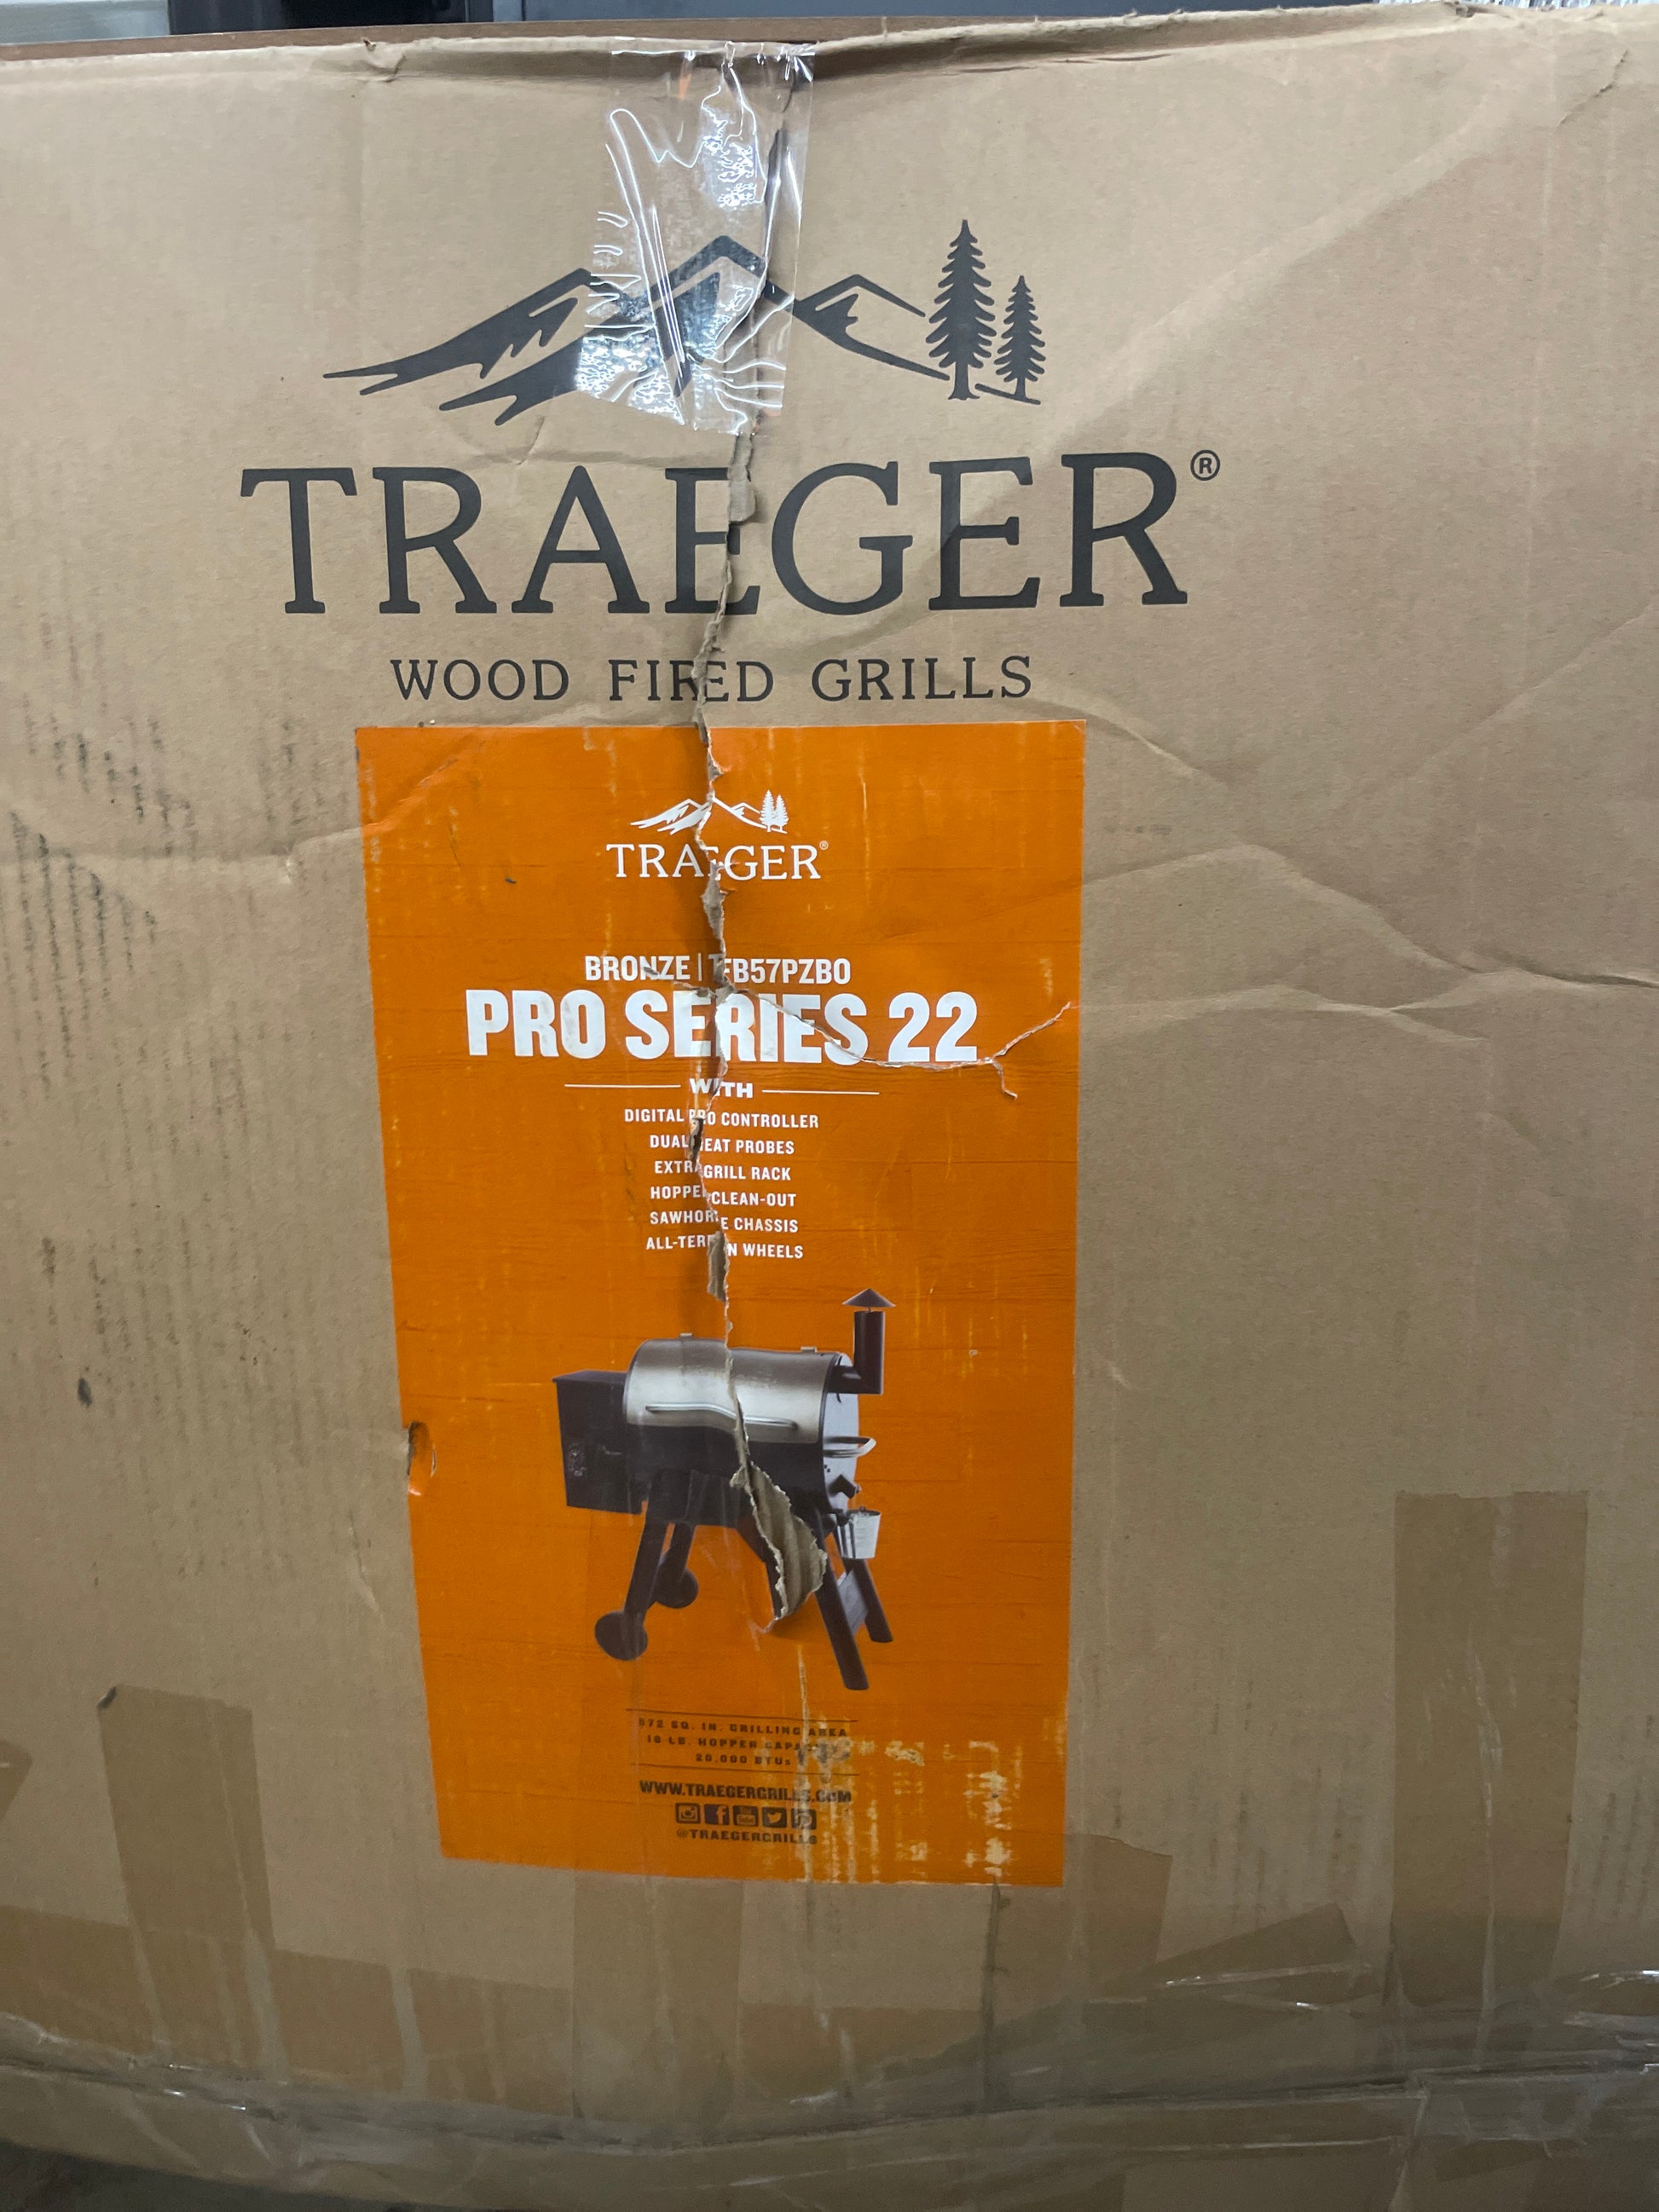 Traeger Grills Pro Series 22 Electric Wood Pellet Grill and Smoker, Bronze - Retail $599 Default Title